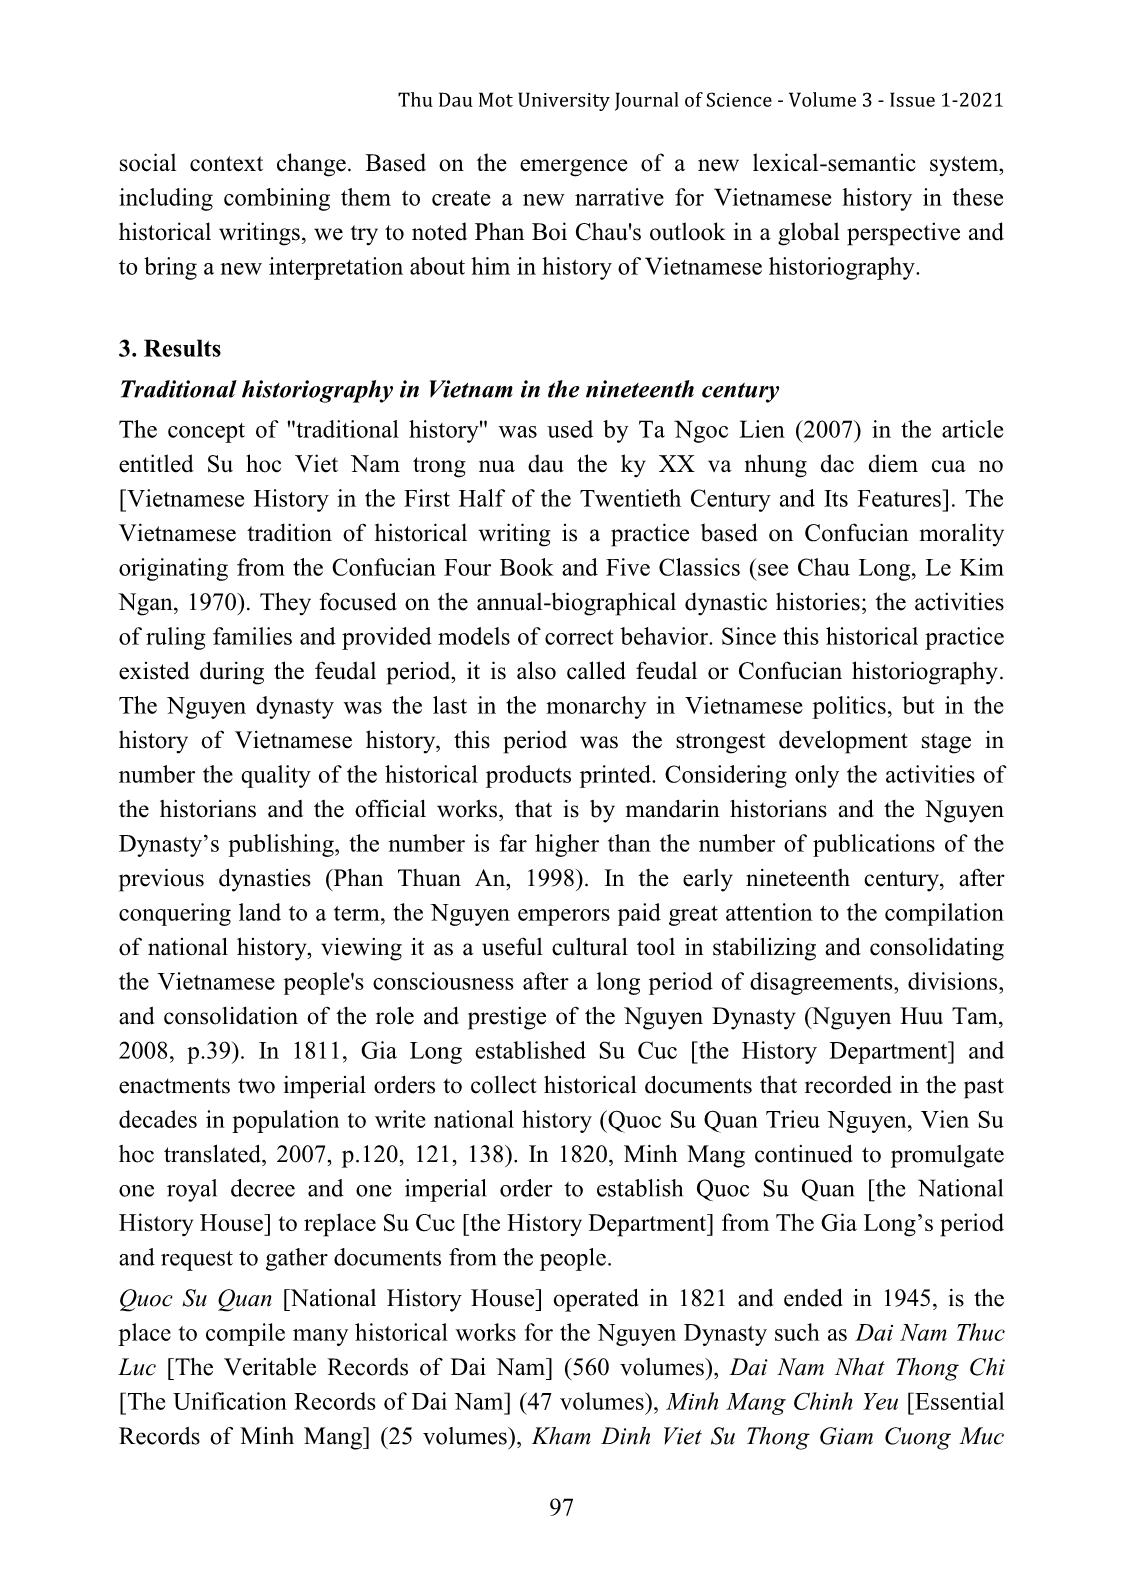 The Shift in historical perception from tradition to modern in Viet Nam in the early twentieth century trang 4